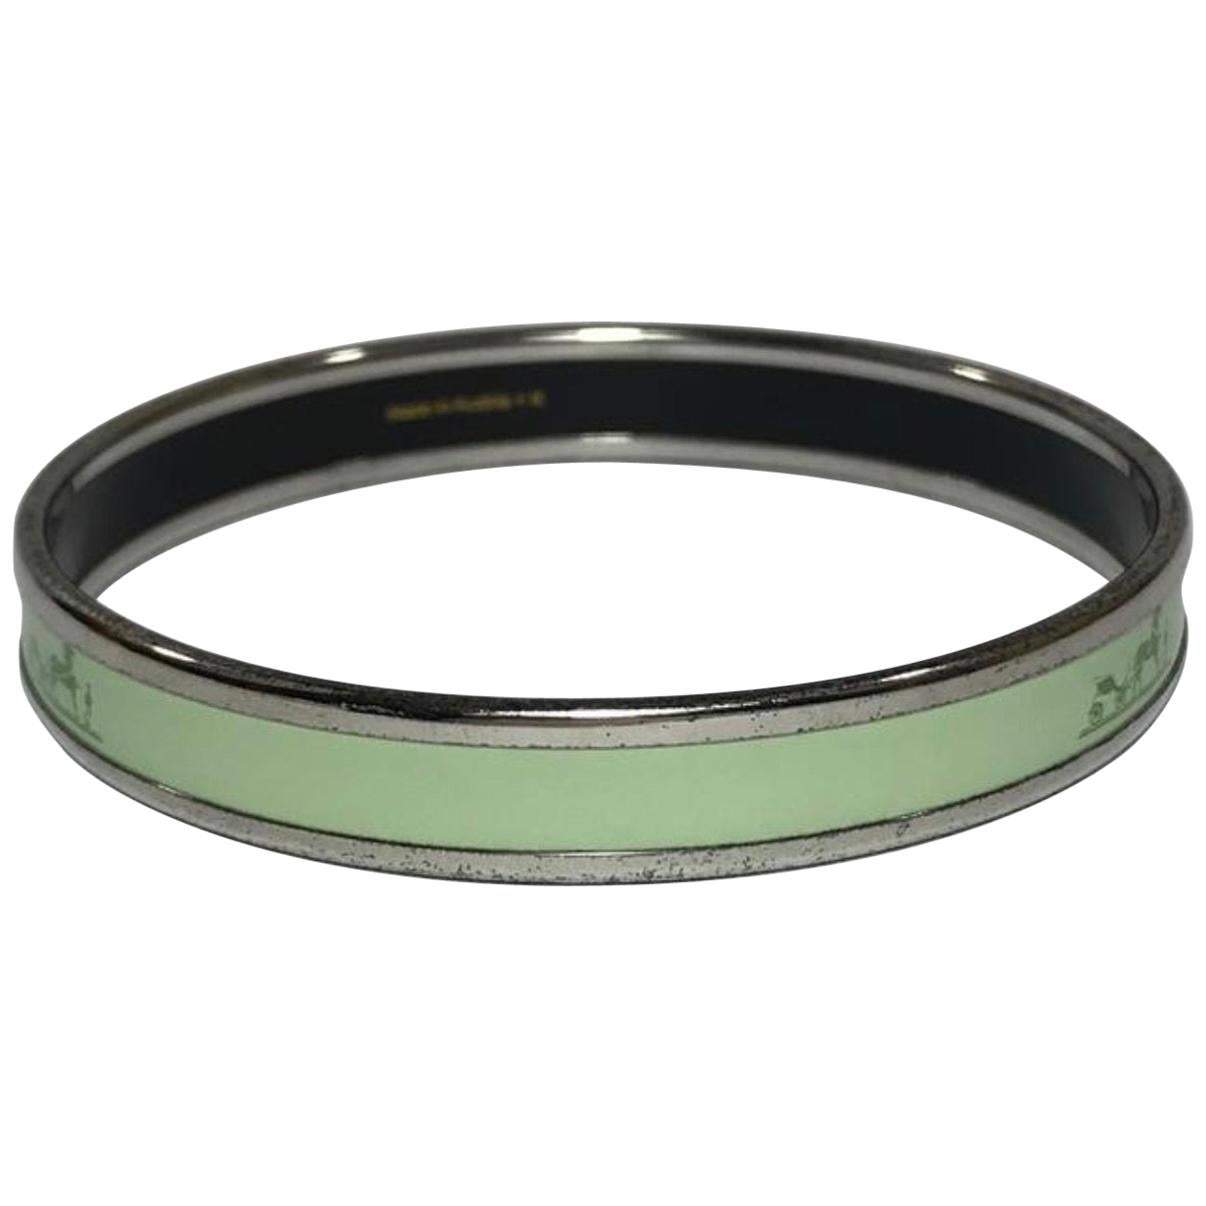 Hermes Horse and Carriage Enamel Bangle in Plain Light Green with Palladium Trim For Sale